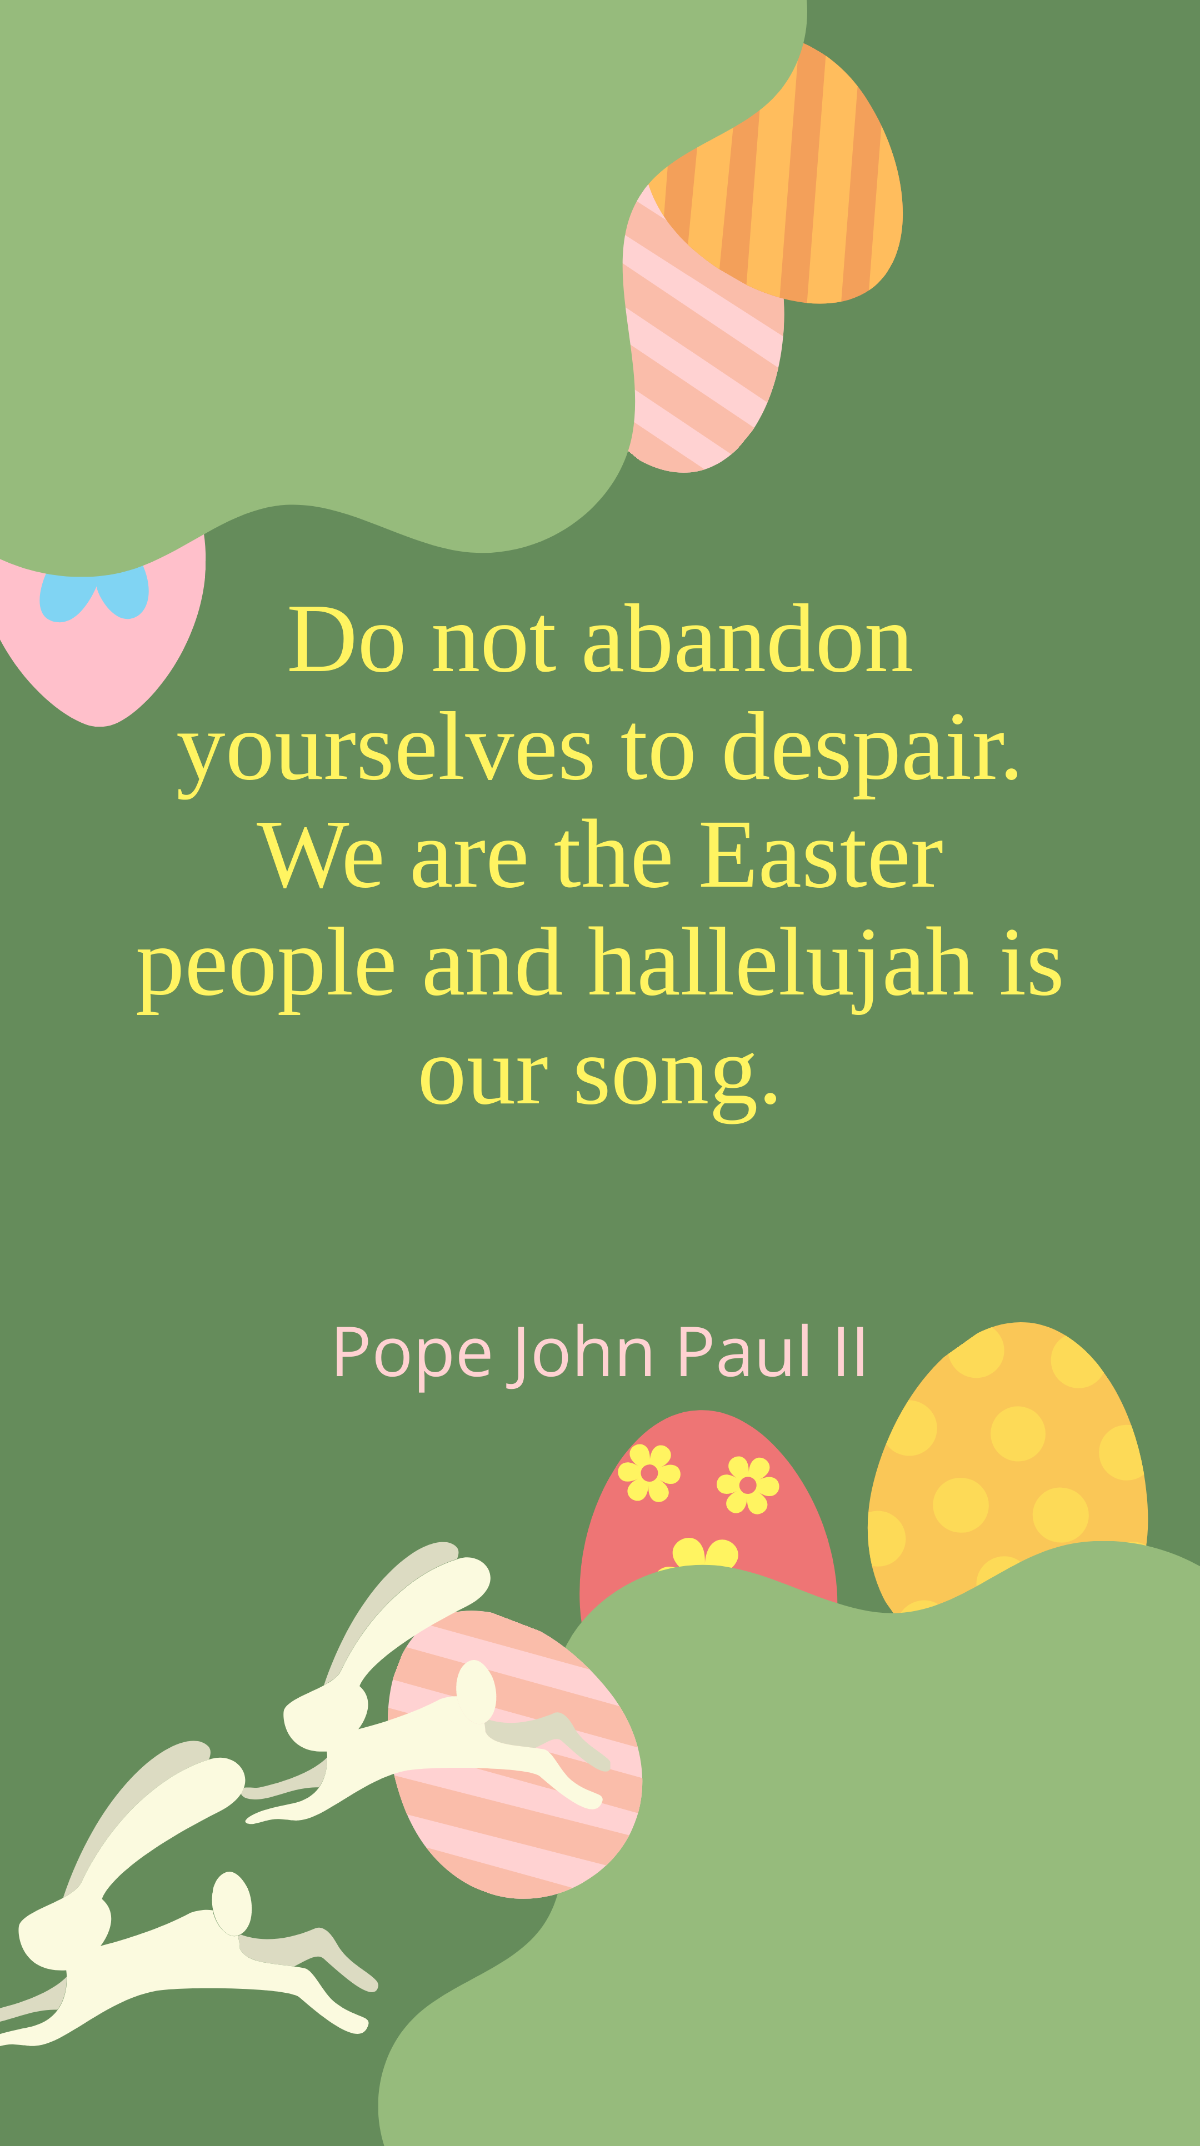 Pope John Paul II - Do not abandon yourselves to despair. We are the Easter people and hallelujah is our song. Template